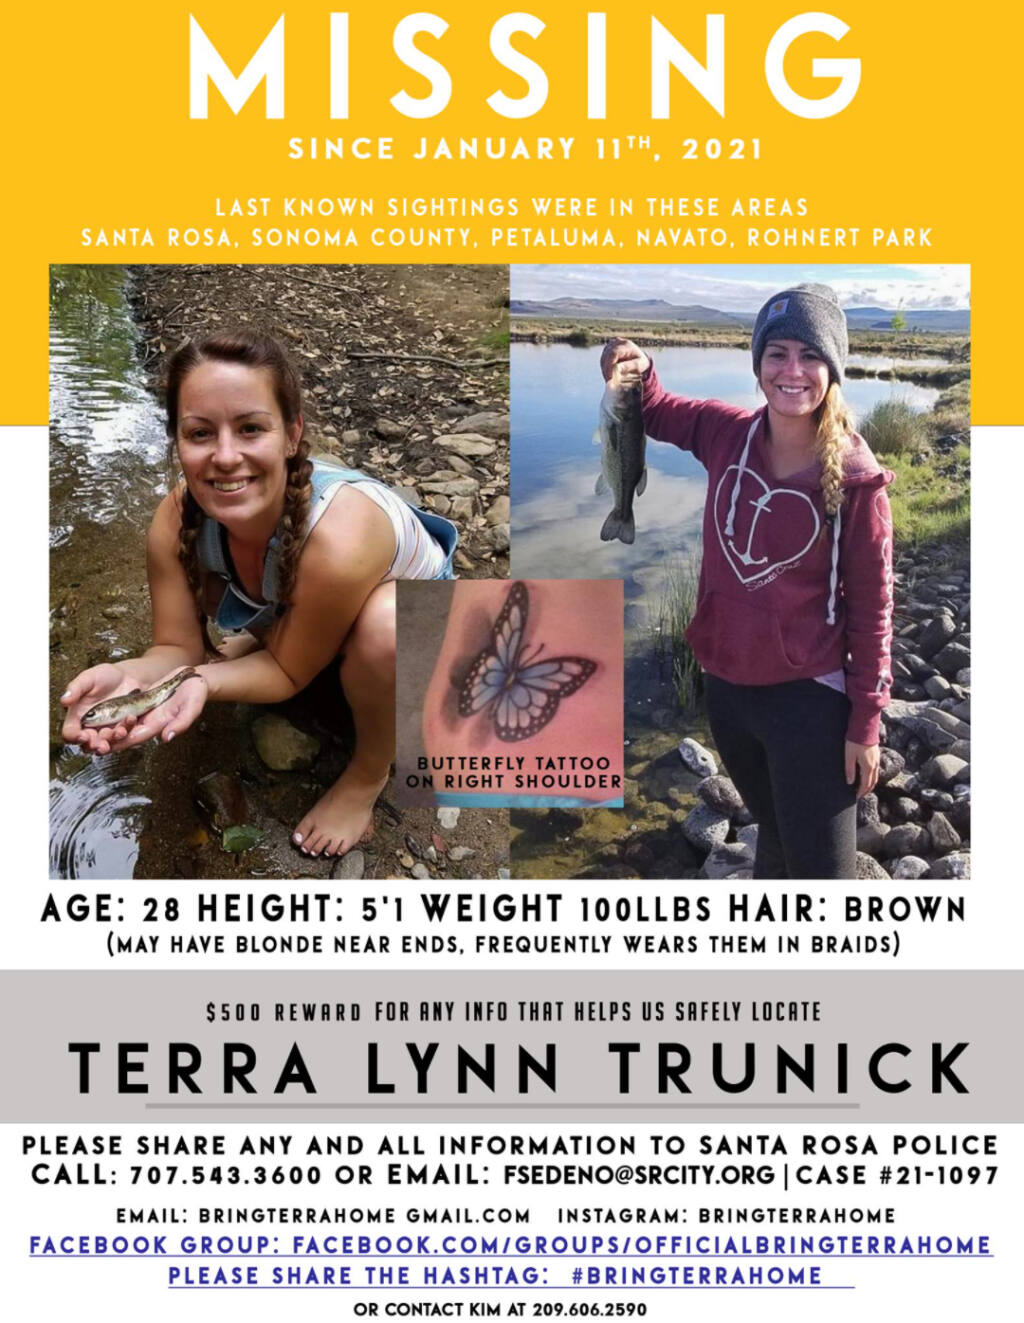 Terra Trunick, 28, is a Santa Rosa resident who has been missing for more than a month. (Official Bring Terra Home / Facebook)